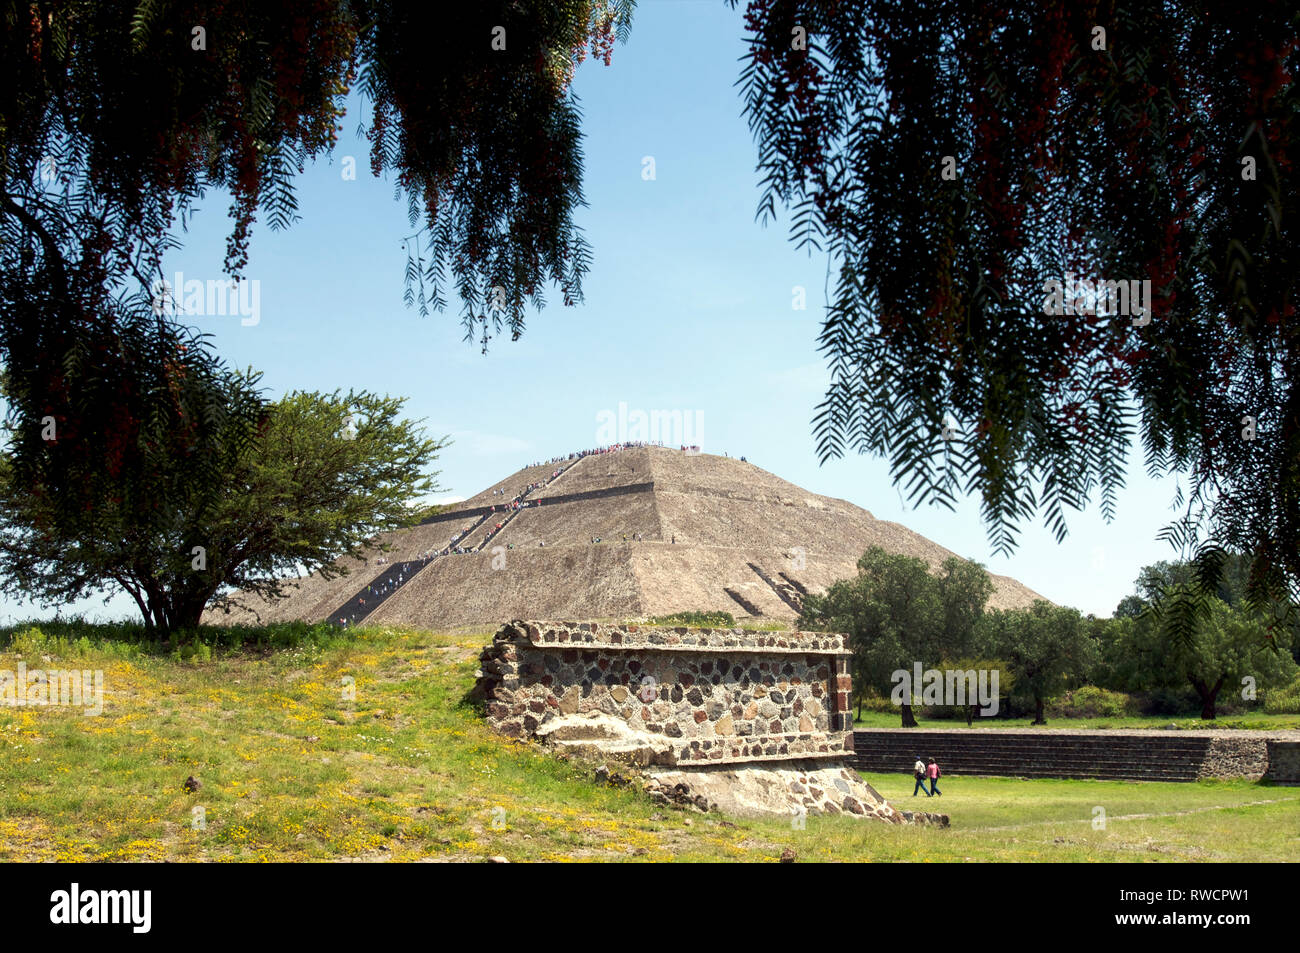 View of the Pyramid of the Sun and people walking on the Avenue of the Dead with tourists at Teotihuacan, Mexico Stock Photo